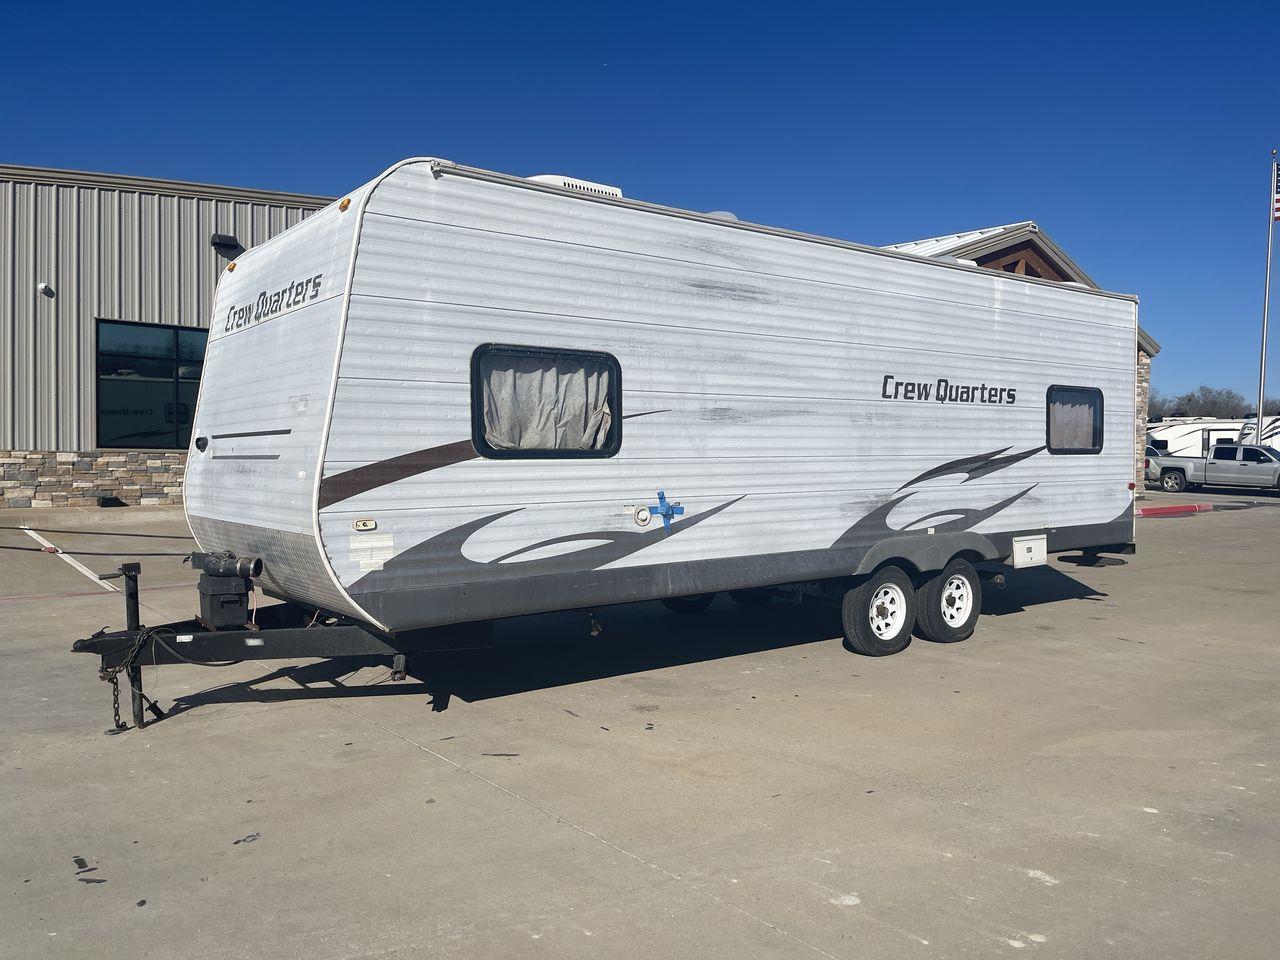 2010 WHITE FOREST RIVER CREW QUARTERS T24-2 - (4X4TWDZ21AR) , Dry Weight: 5,275 lbs | Gross Weight: 7,713 lbs | Slides: 0 transmission, located at 4319 N Main St, Cleburne, TX, 76033, (817) 678-5133, 32.385960, -97.391212 - The 2010 Crew Quarters T24-2 is a cute and cozy travel trailer that comes with lovely features that you would absolutely adore in a camper. It features a corner bunk bed with a nice window on the bottom bunk. It has a mini fridge, a microwave, and a solid surface counter space. A tall double-door ca - Photo #19